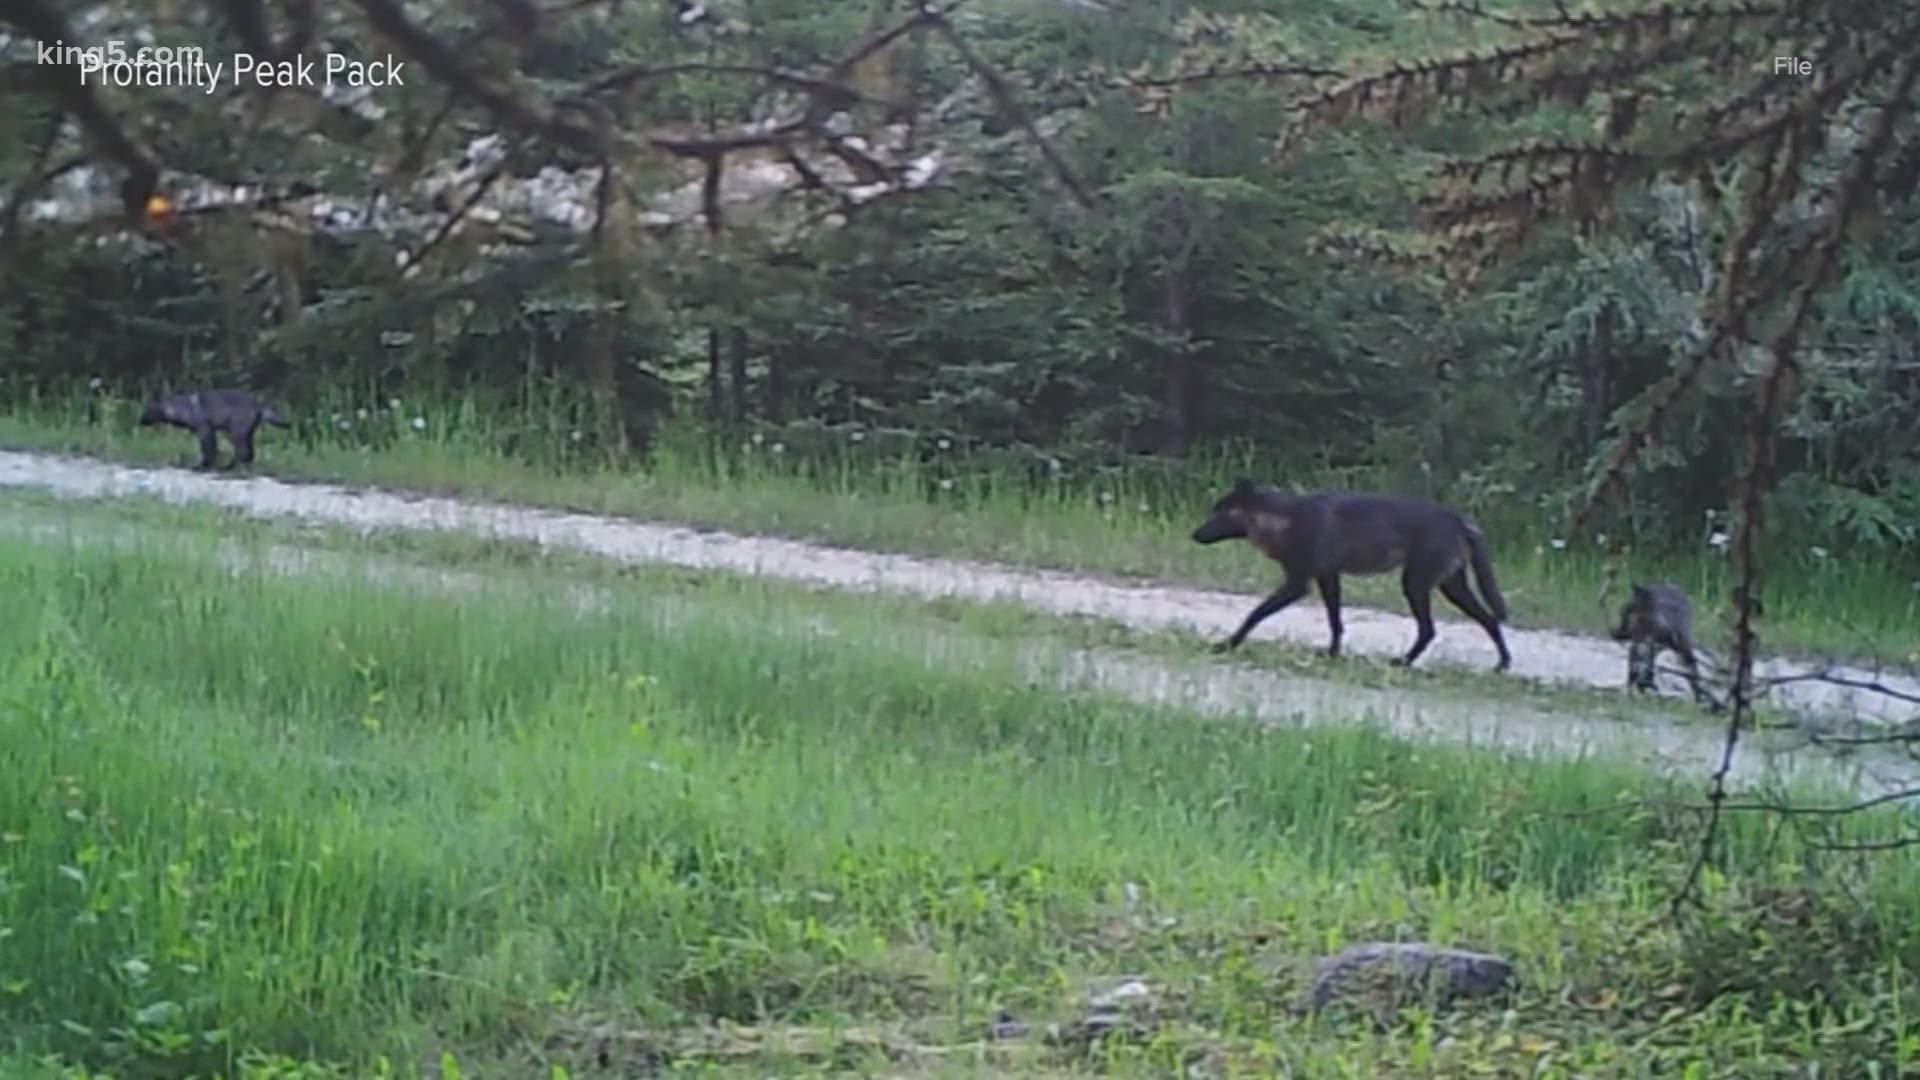 Gray wolves have recovered from near extinction in parts of the U.S. but remain absent from much of their historical range. Environmental groups condemned the move.